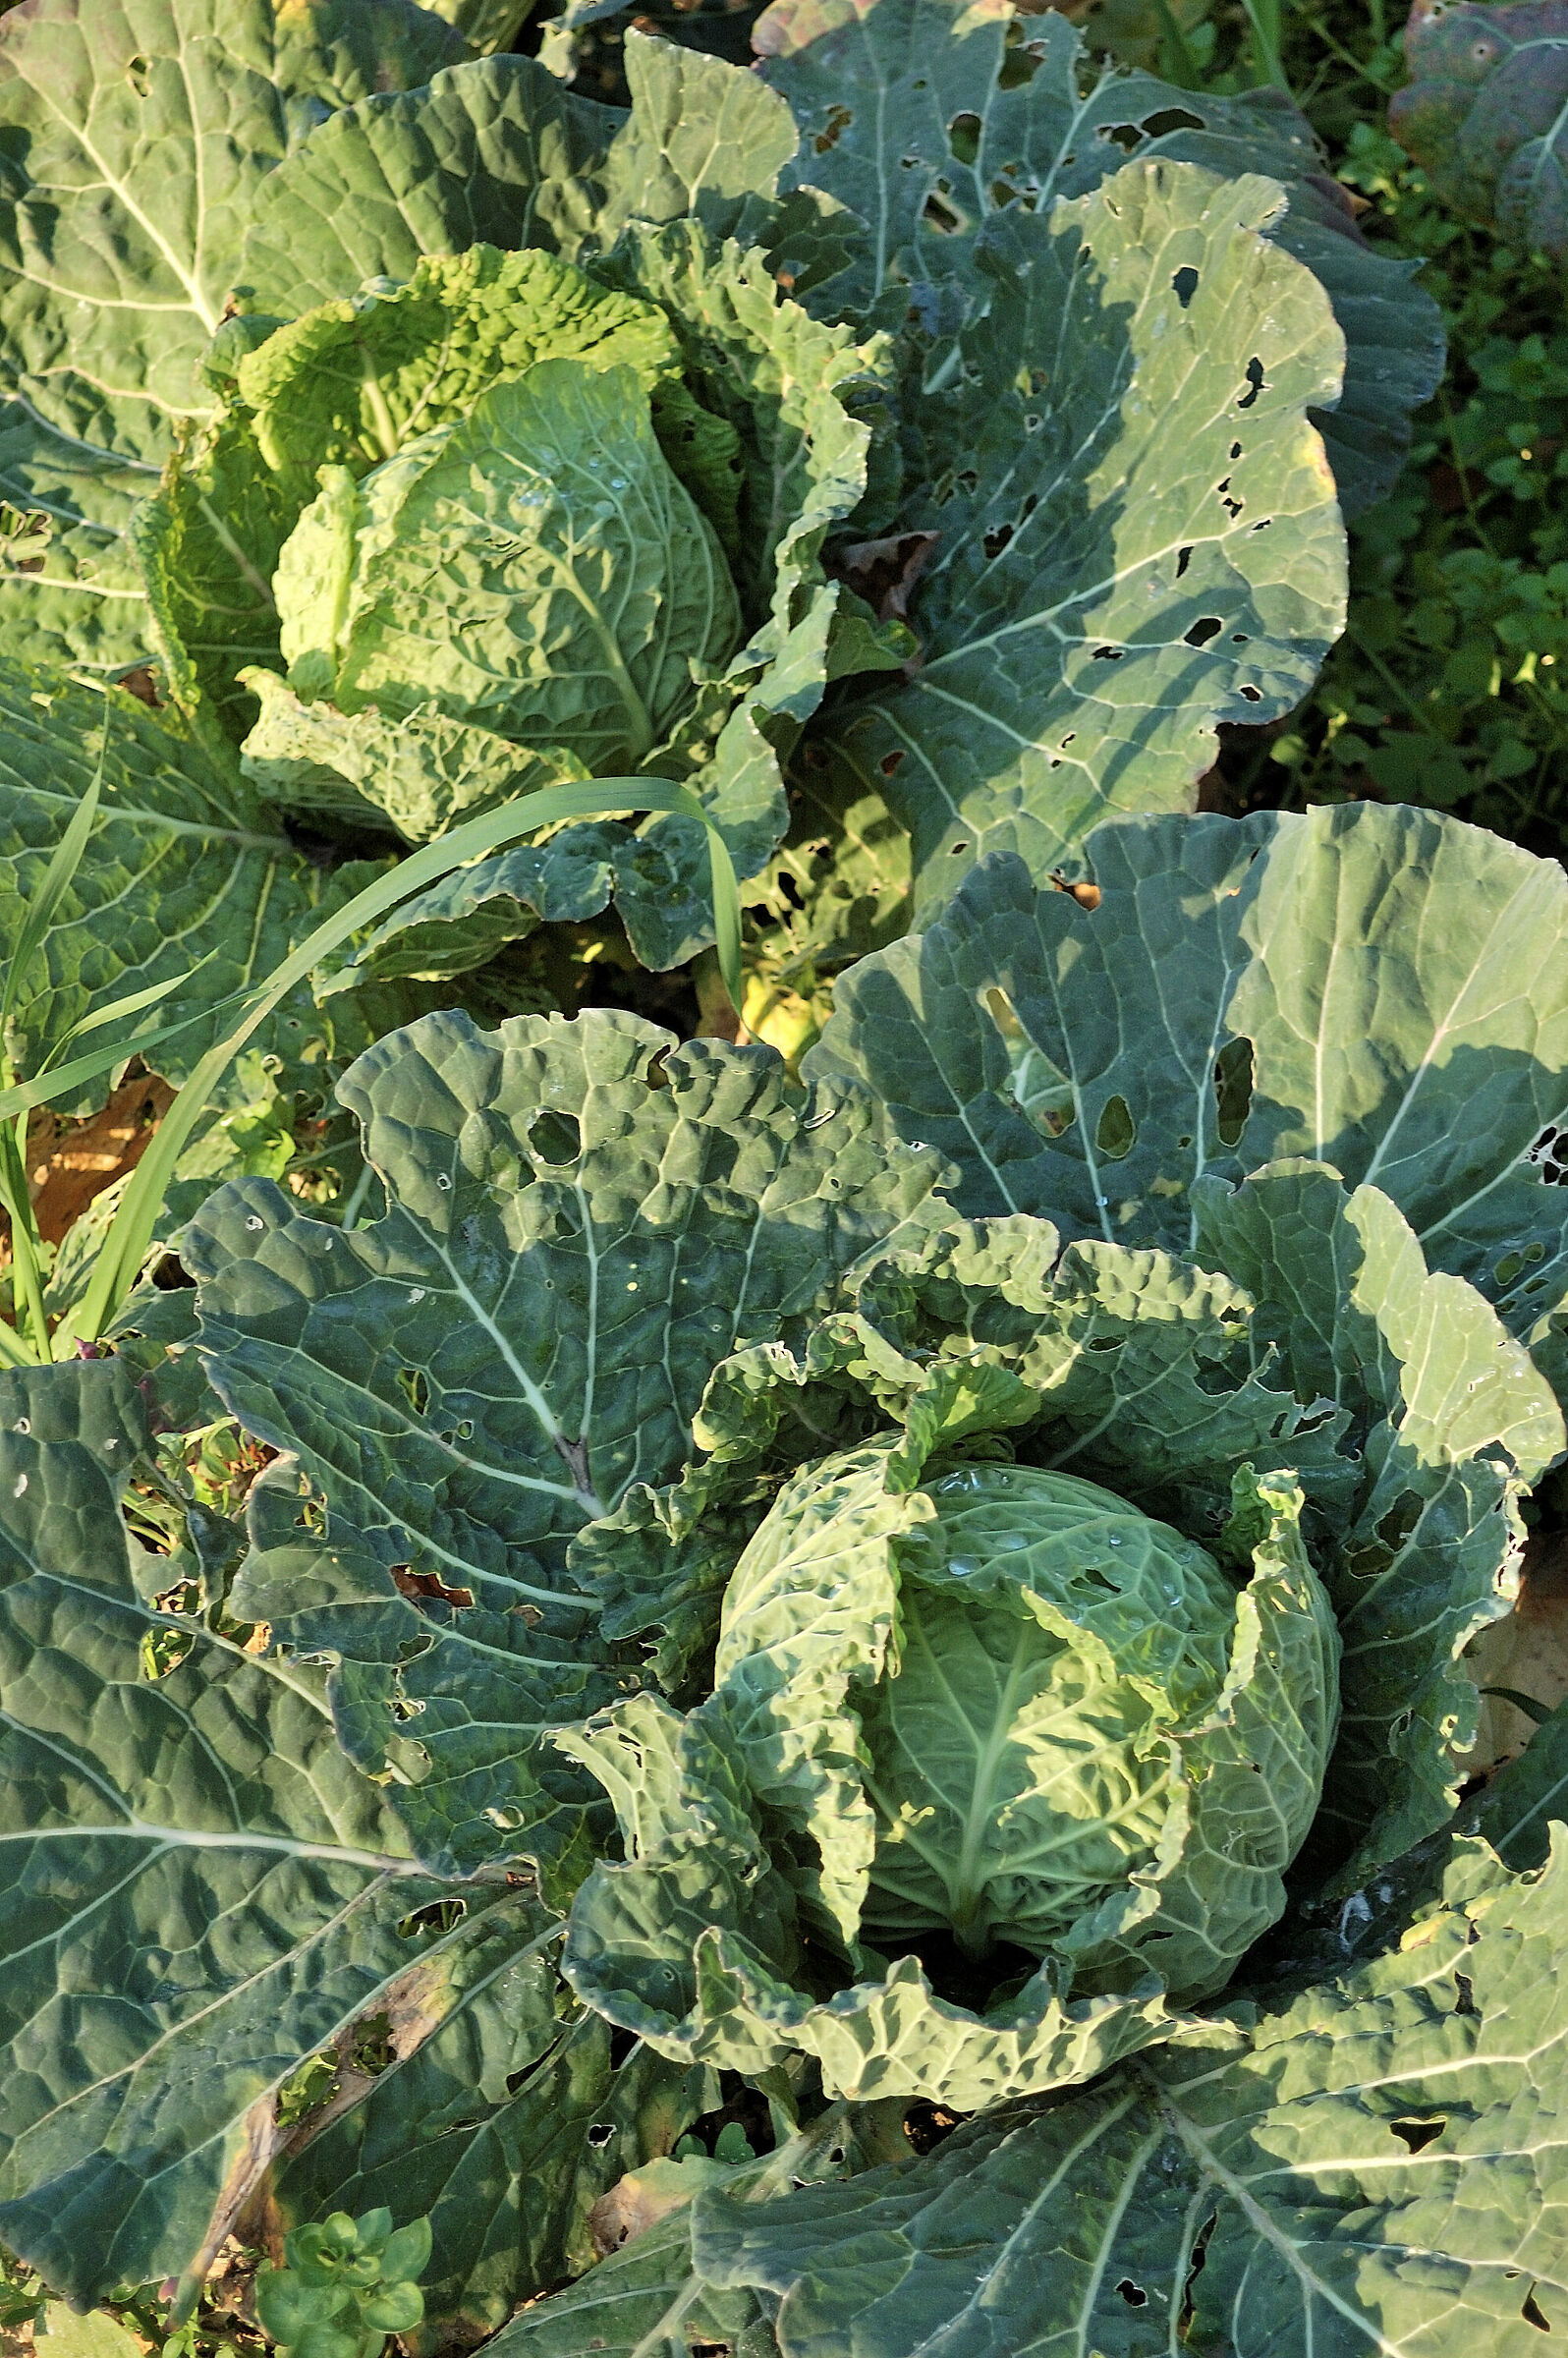 And what the hell... Savoy cabbage!!...